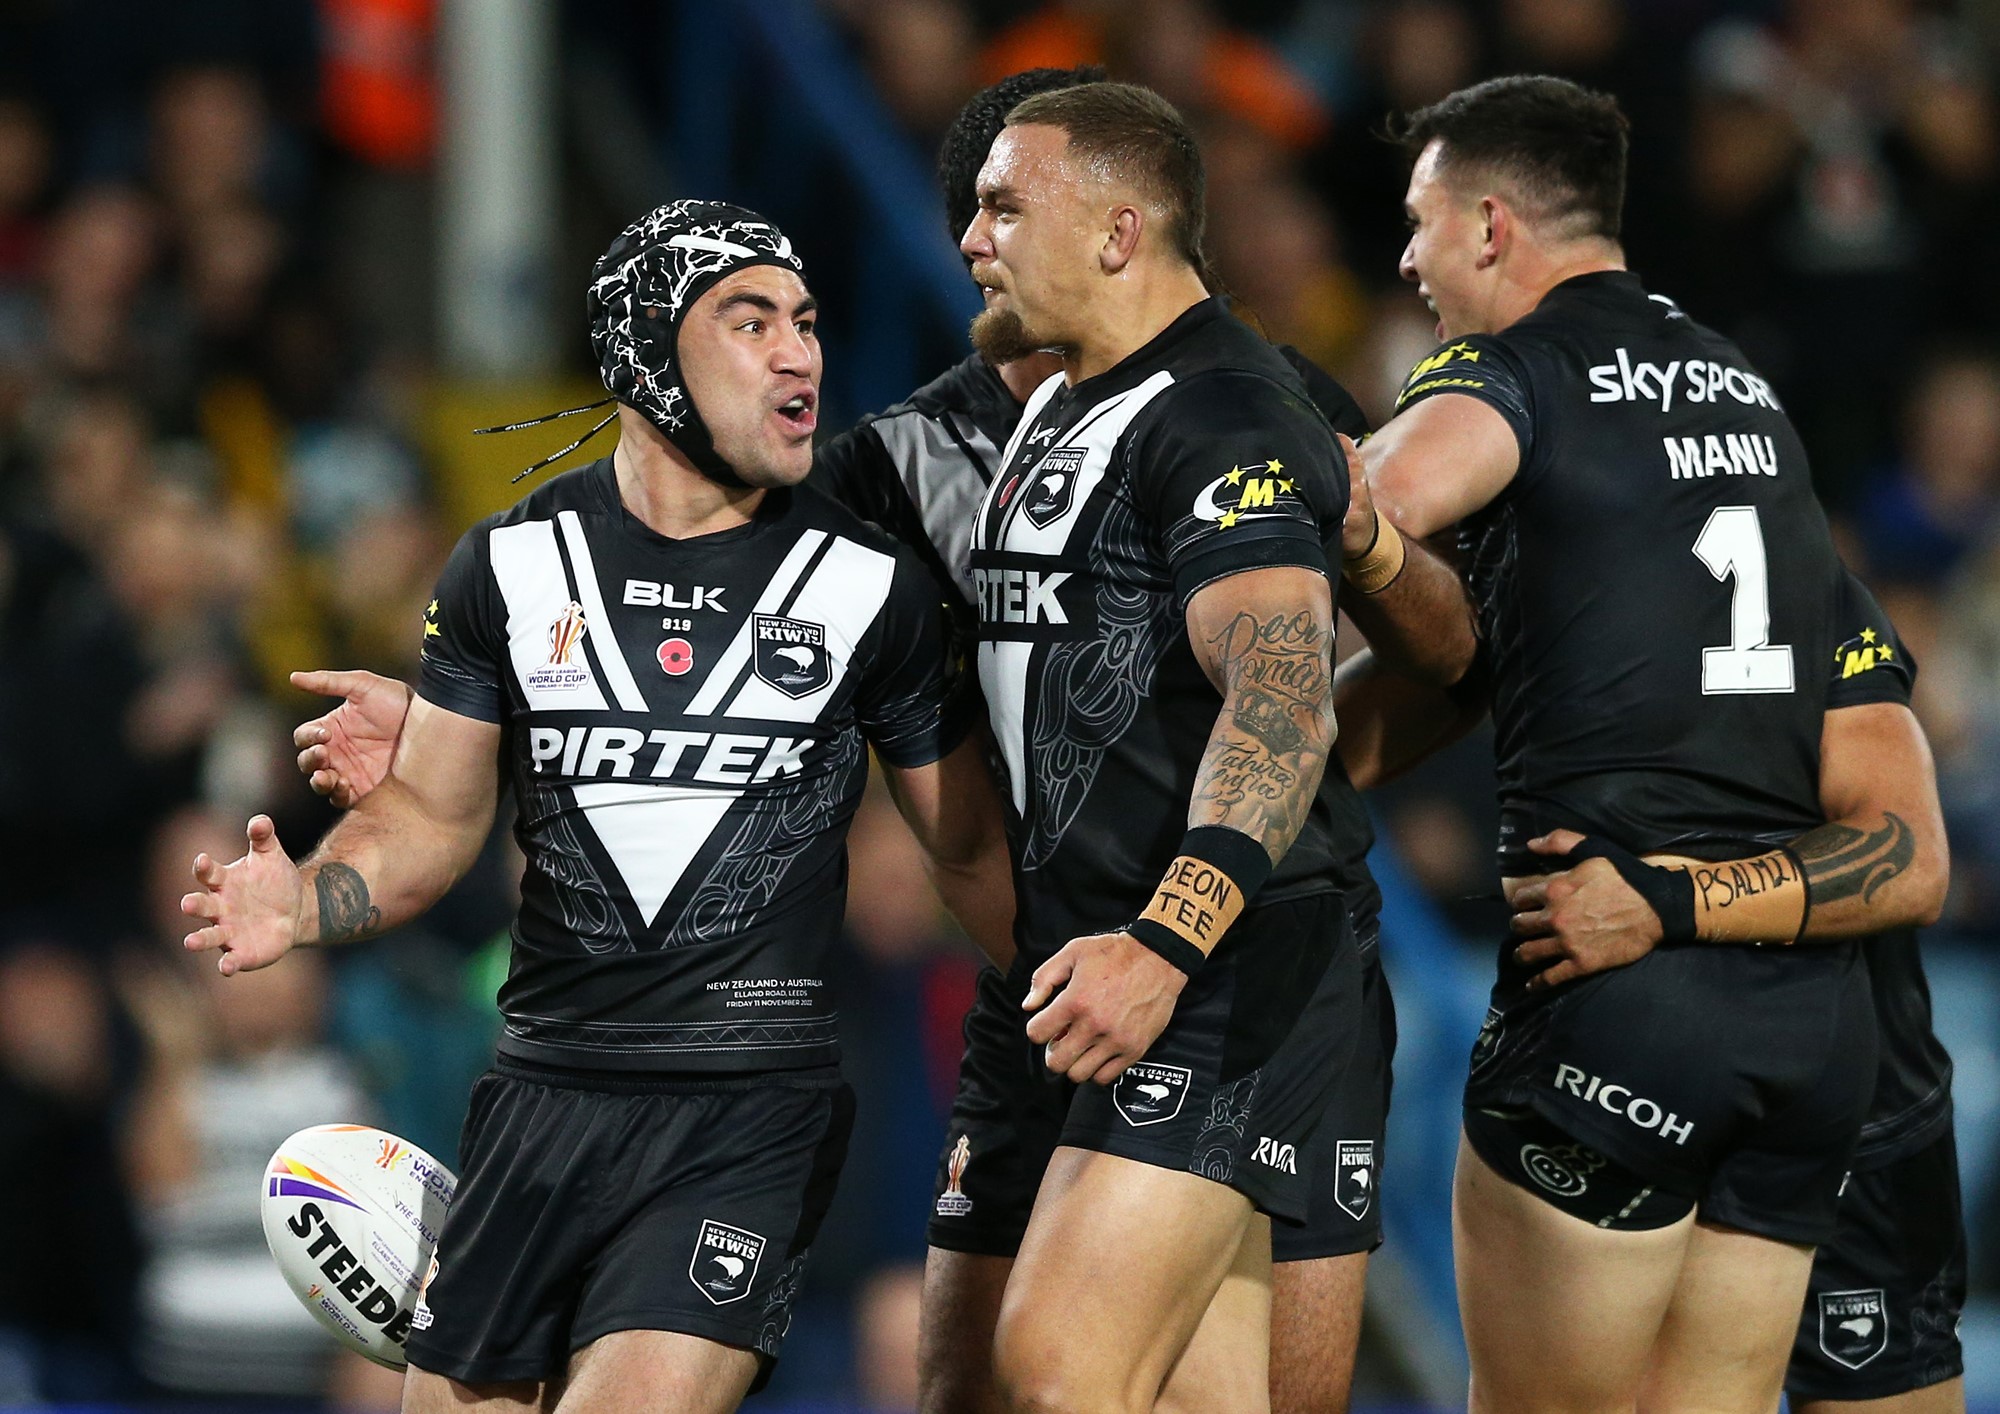 Rugby League World Cup semifinal live updates Kangaroos defeat Kiwis 16-14 to secure spot in the final